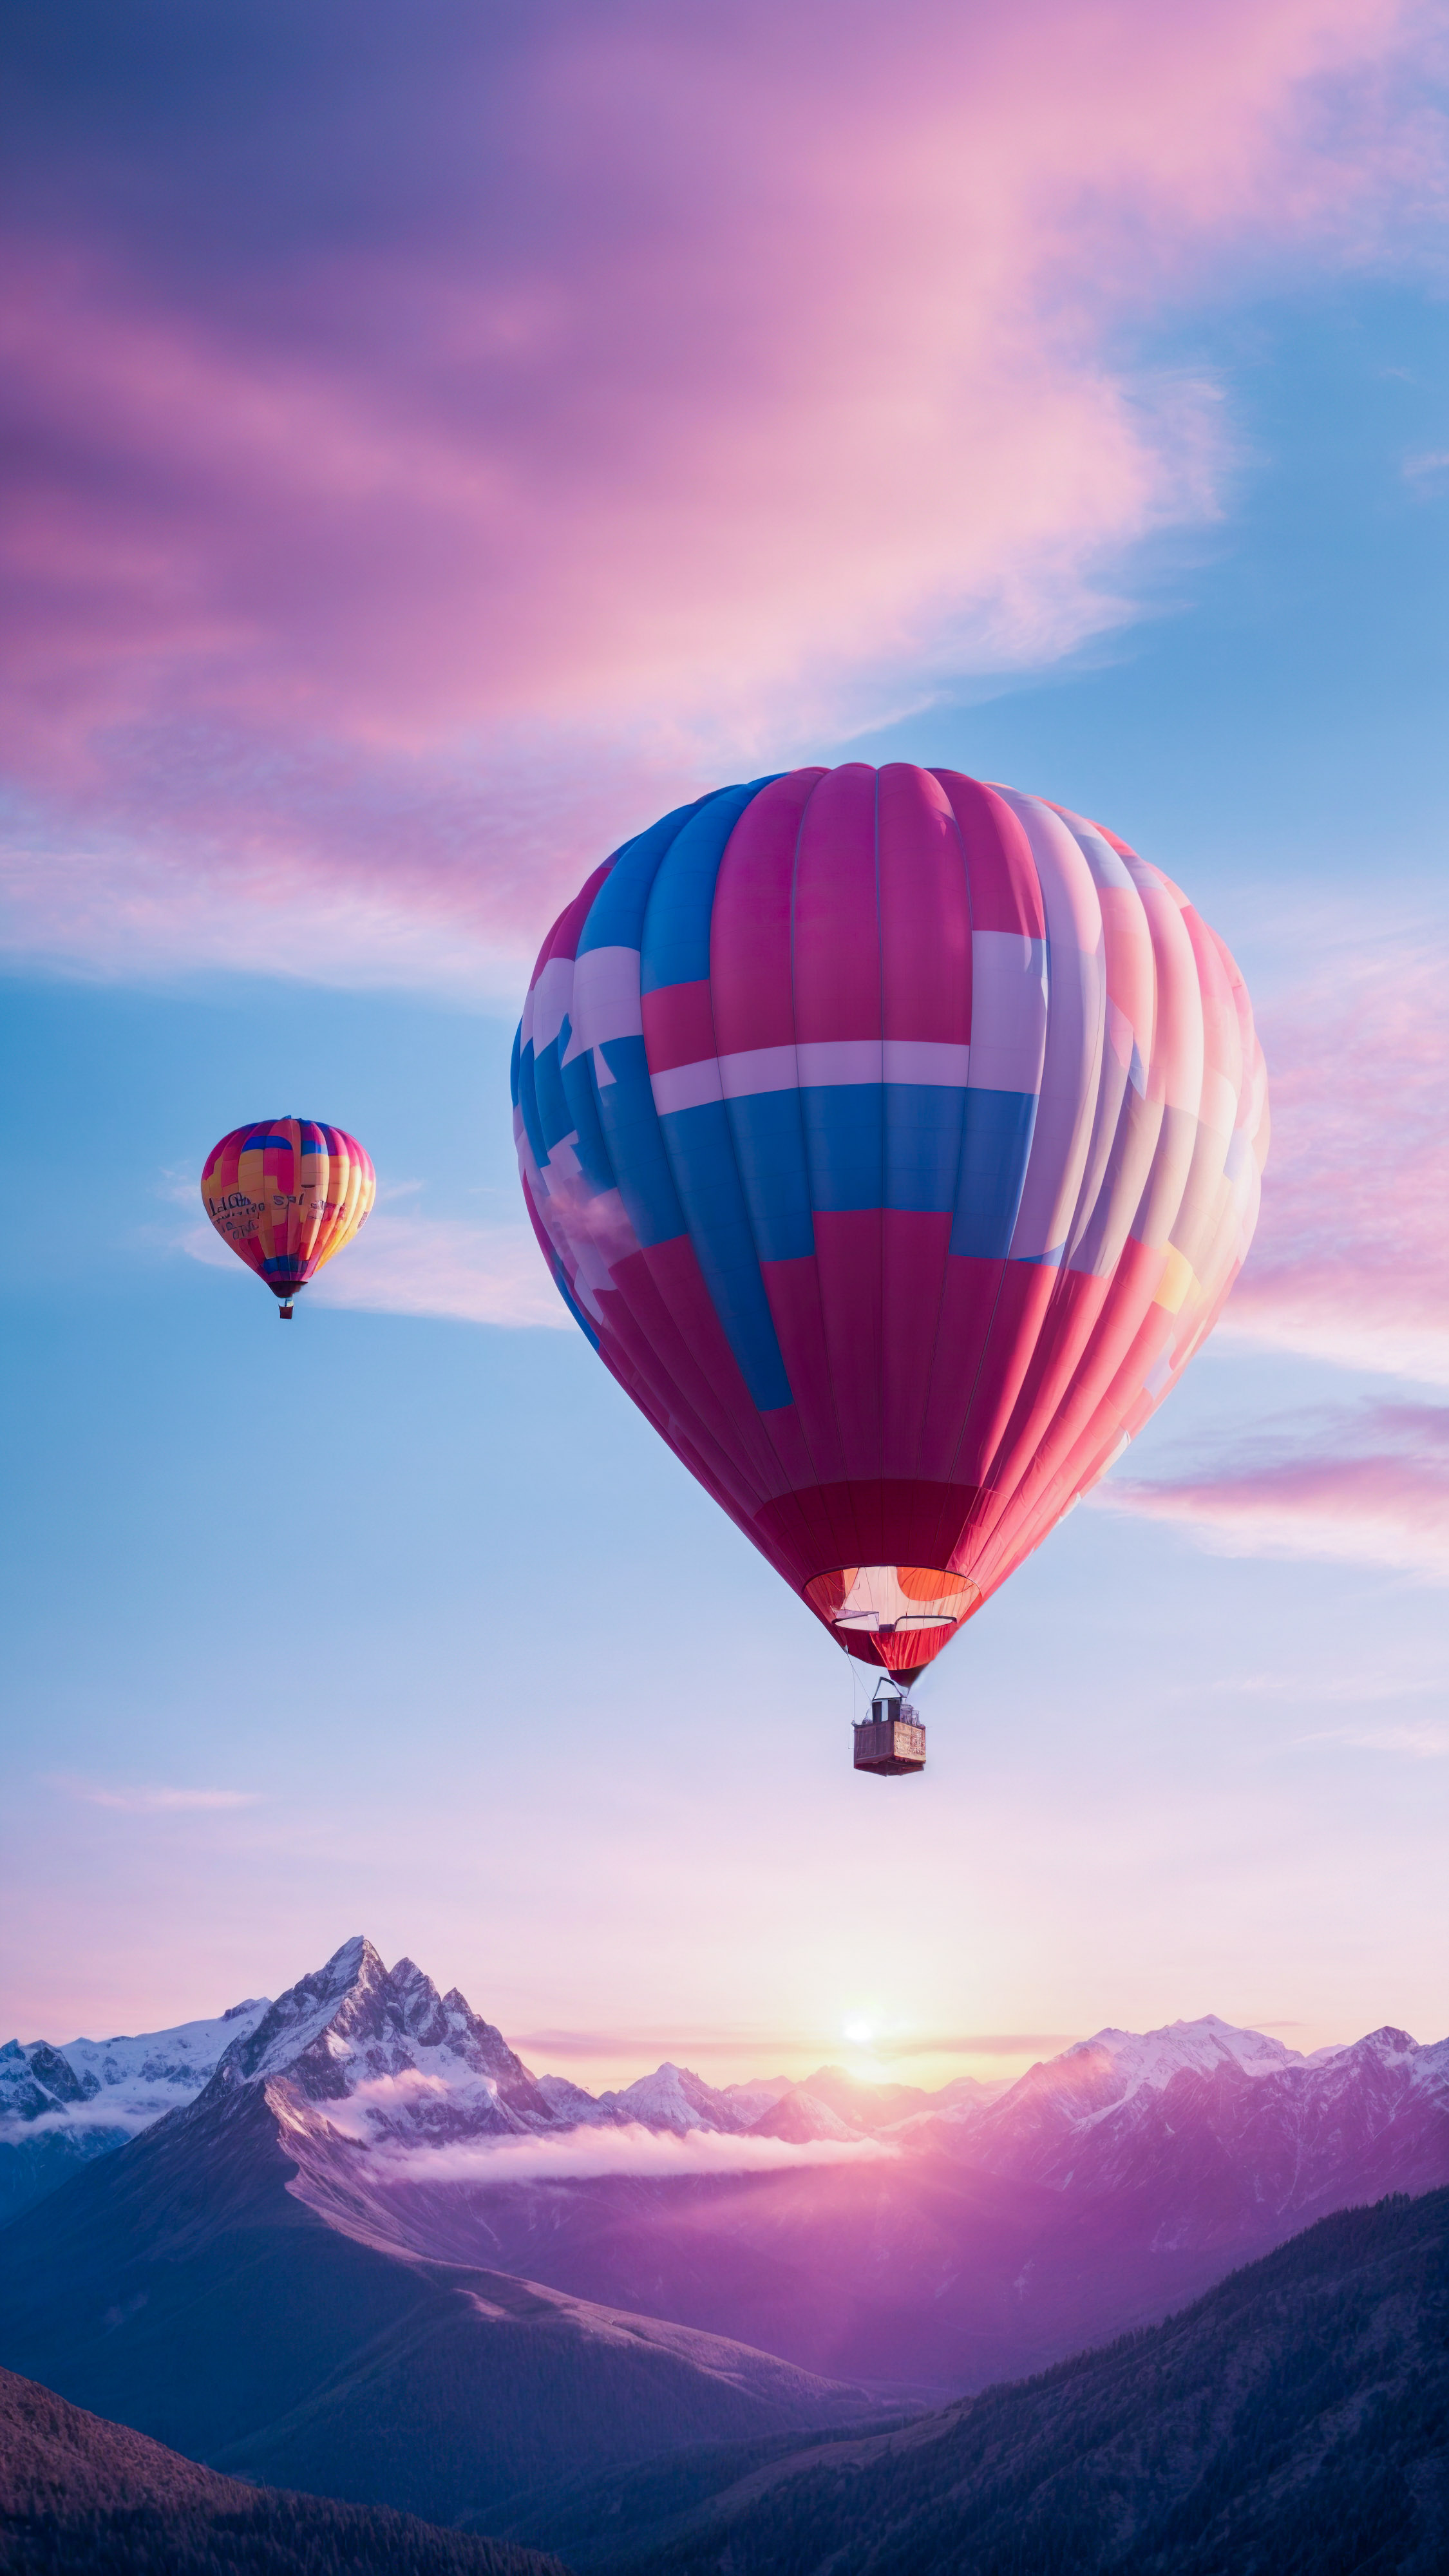 Get lost in the magic of a sunrise over the mountains, with pink and blue hues and a hot air balloon flying in the sky, by choosing this iPhone wallpaper.